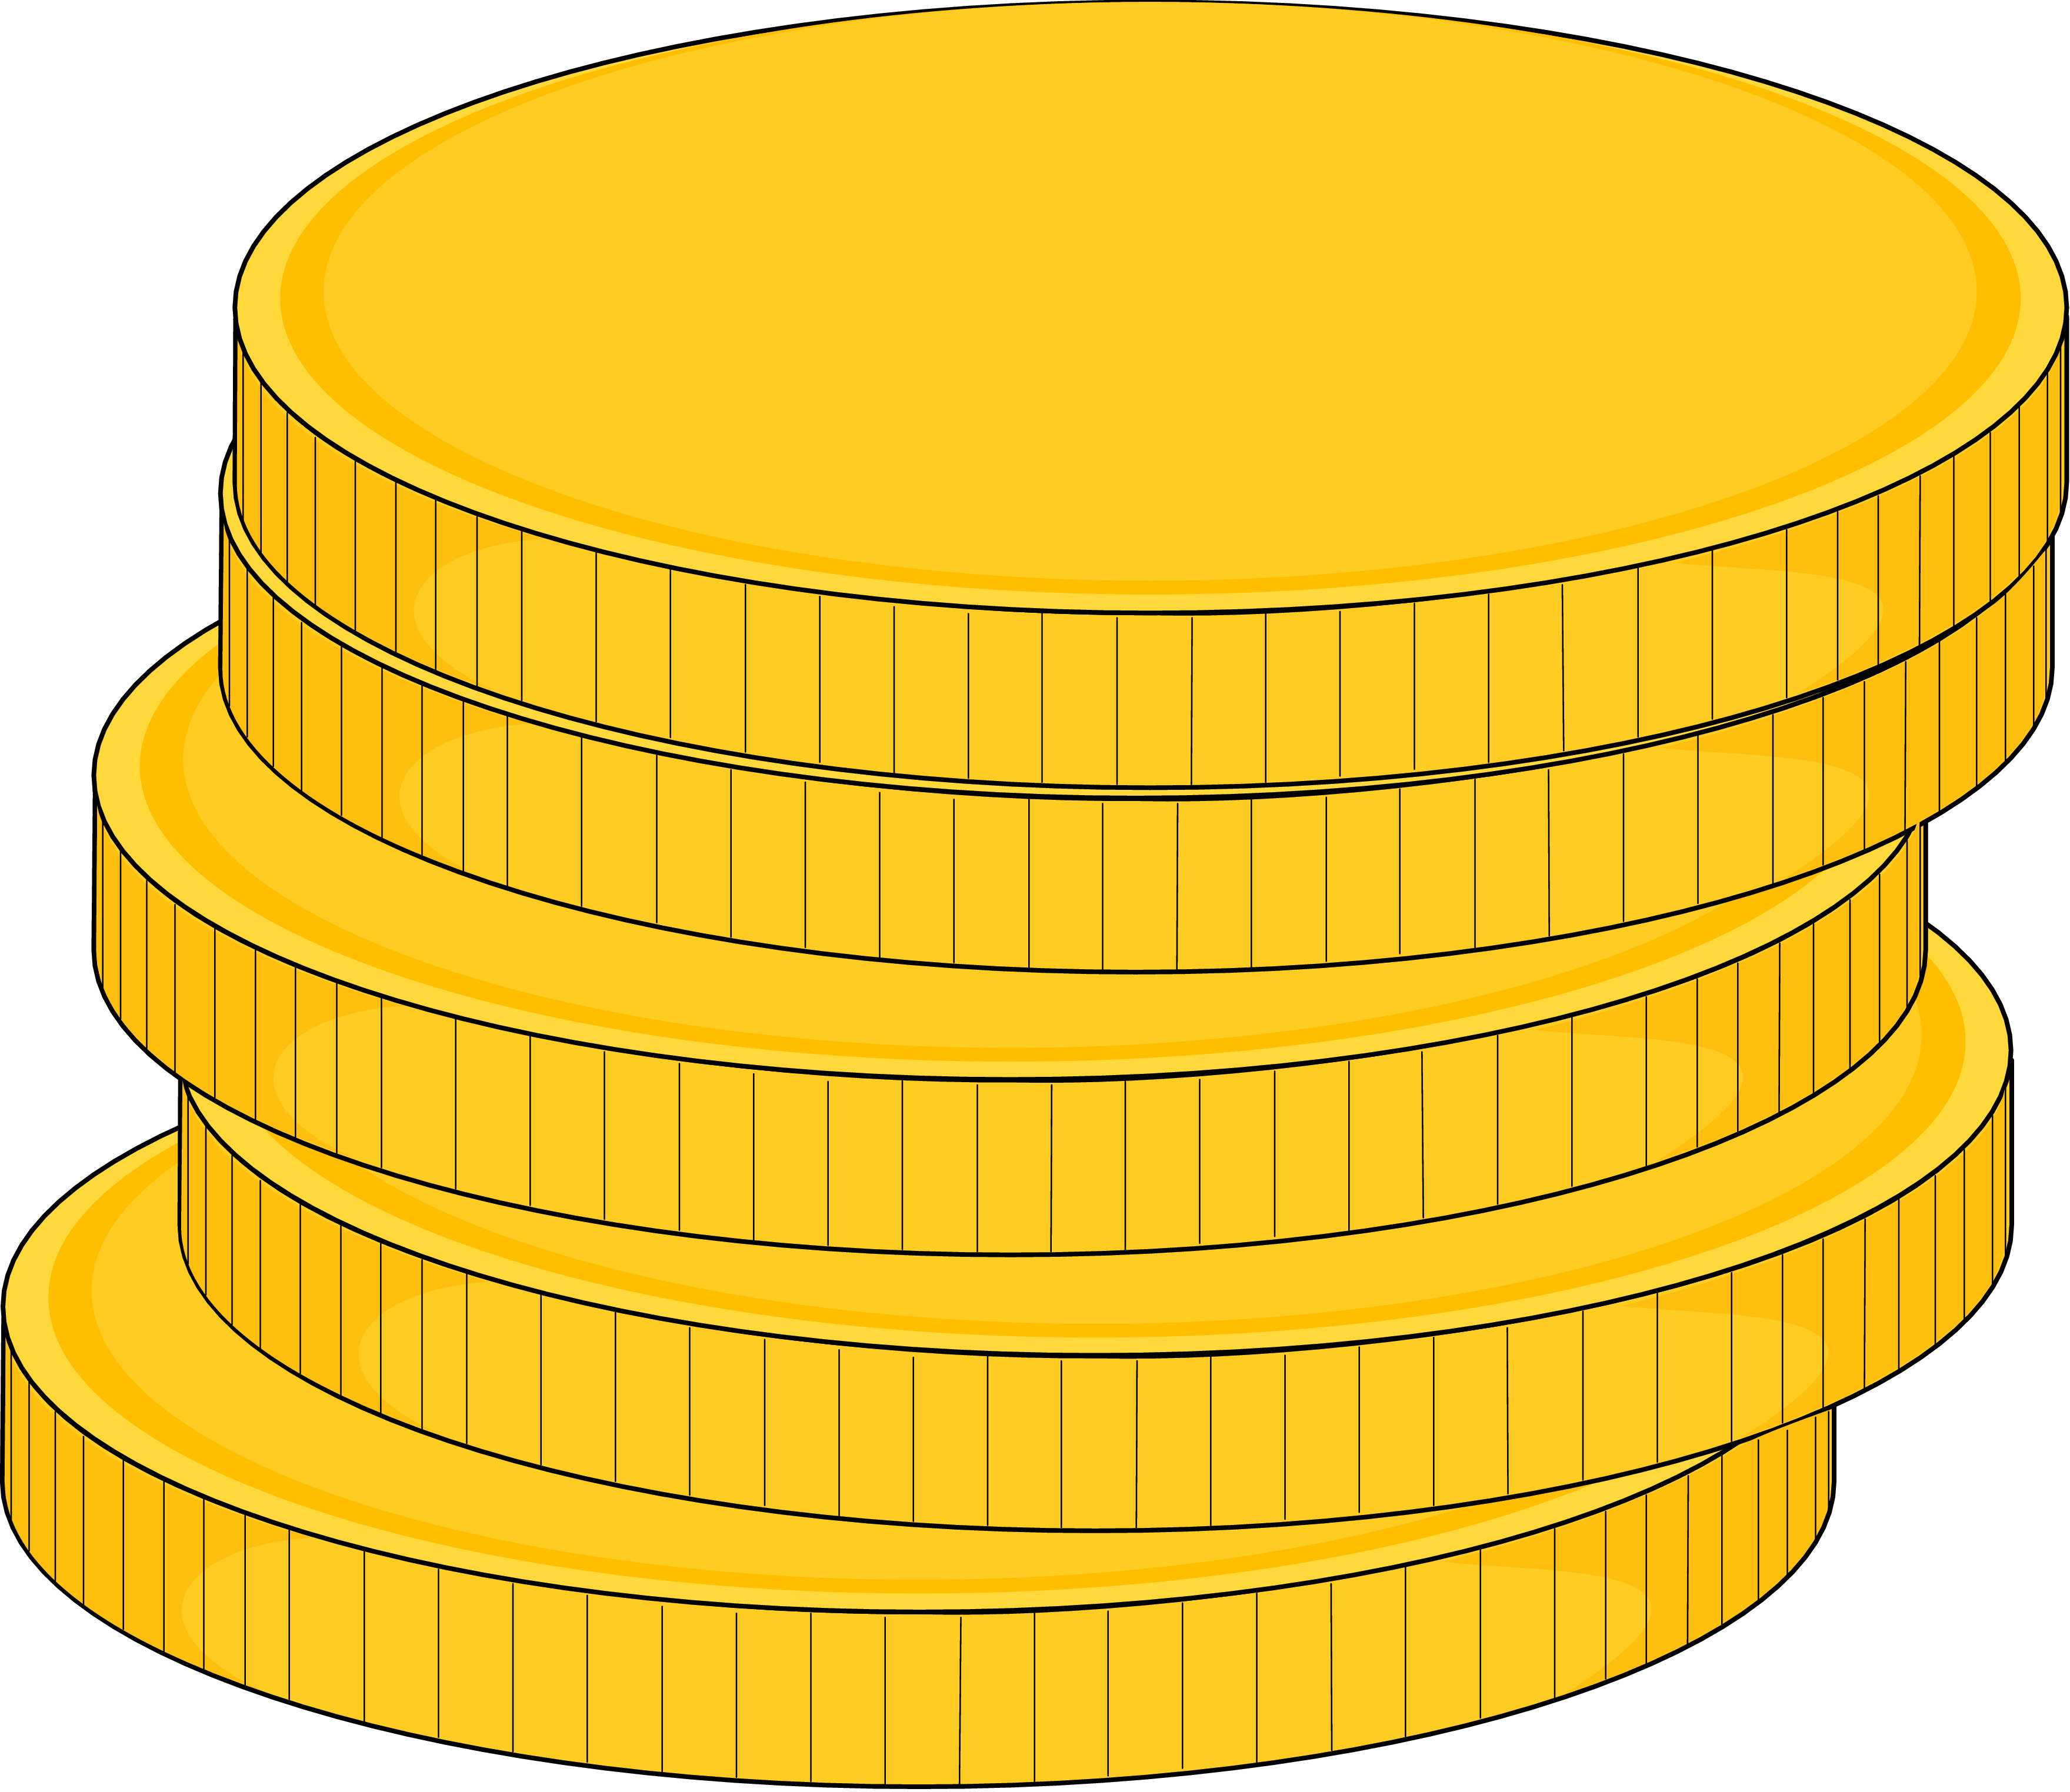 Amount of Coins